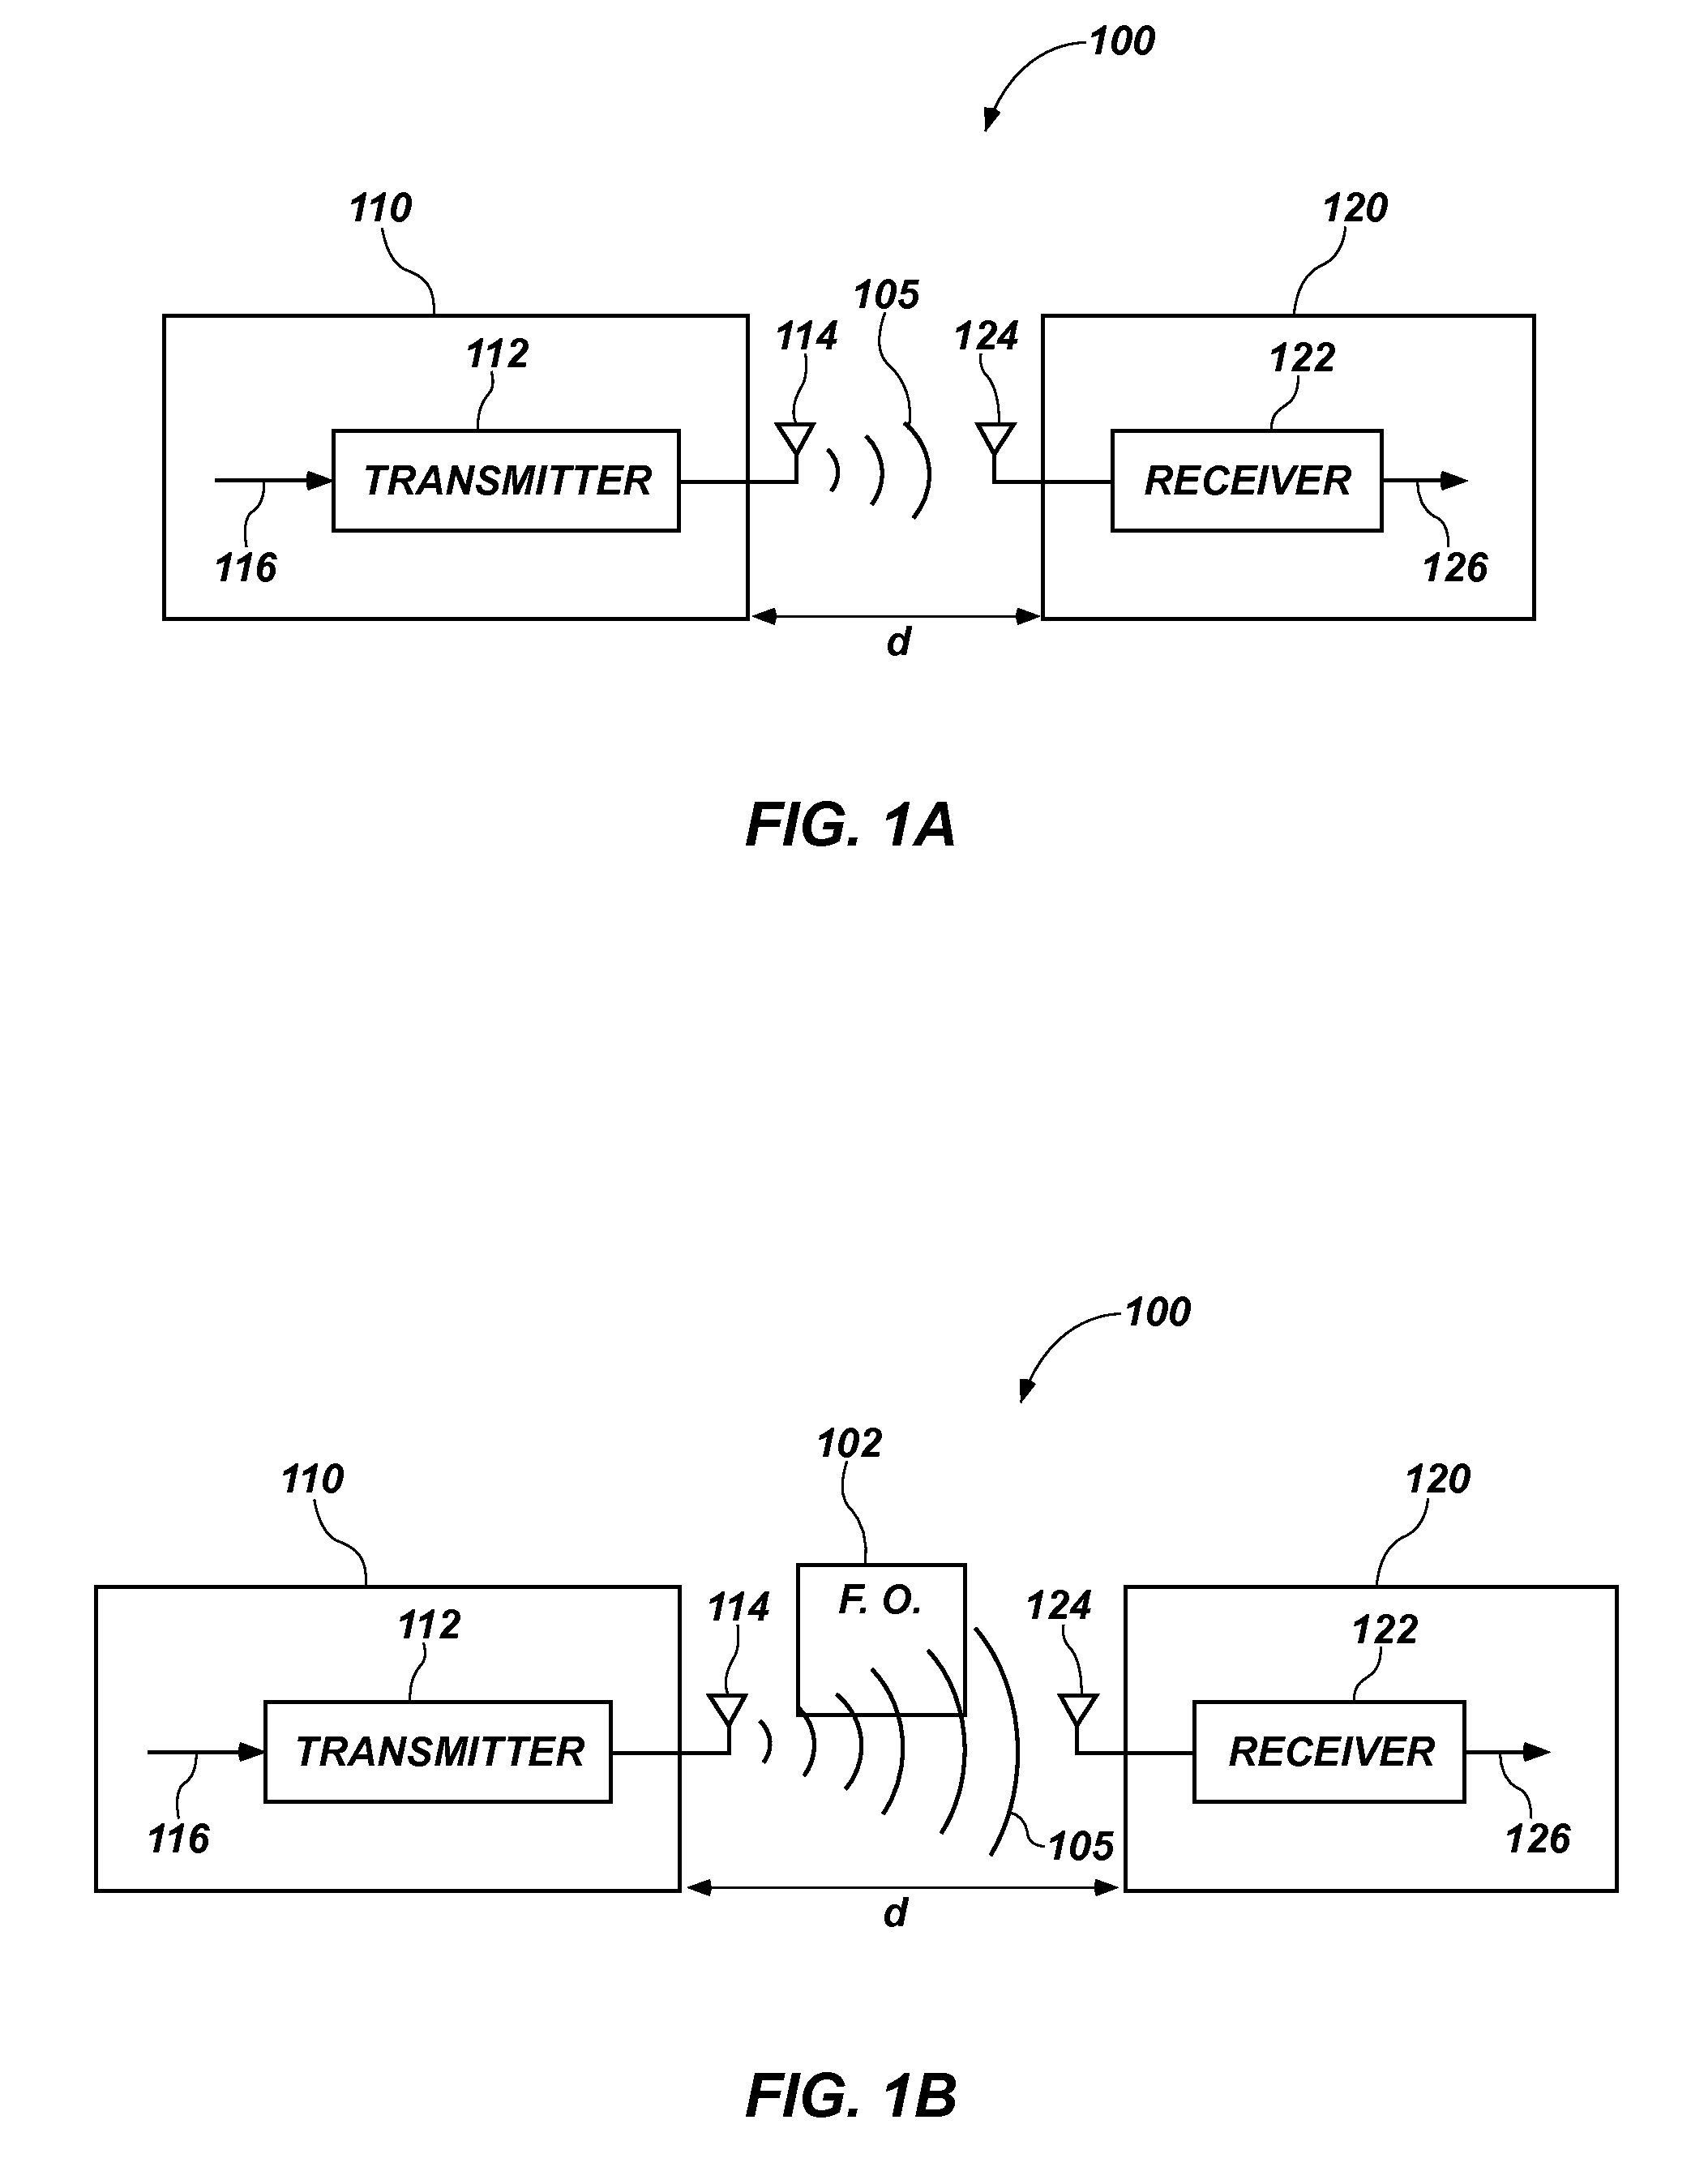 Apparatus, system, and method for detecting a foreign object in an inductive wireless power transfer system via coupling coefficient measurement